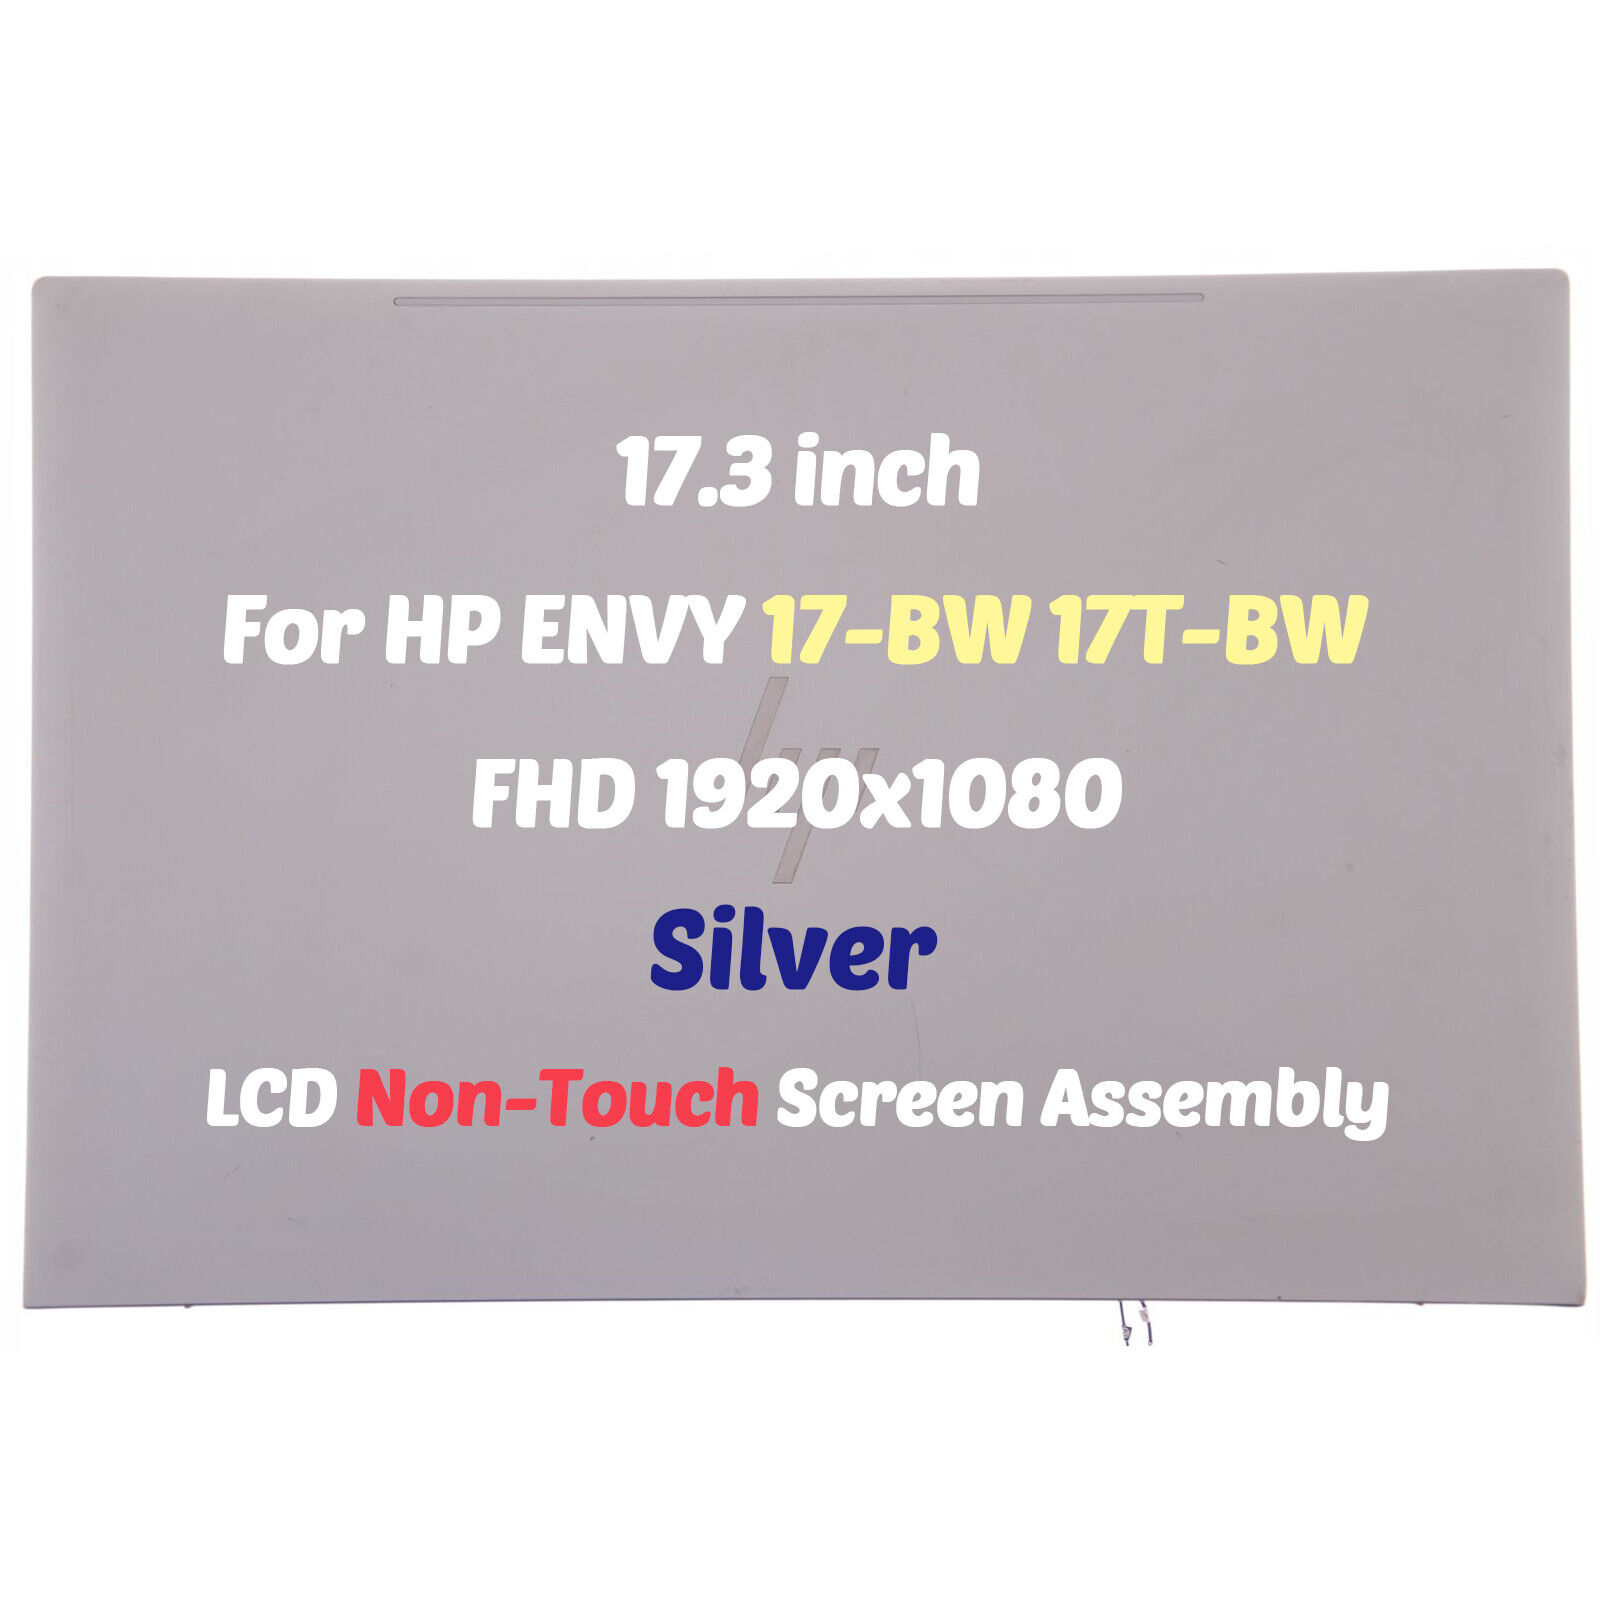 L20696-001 For HP ENVY 17-BW 17T-BW FHD Non-Touch Screen LCD Display Assembly